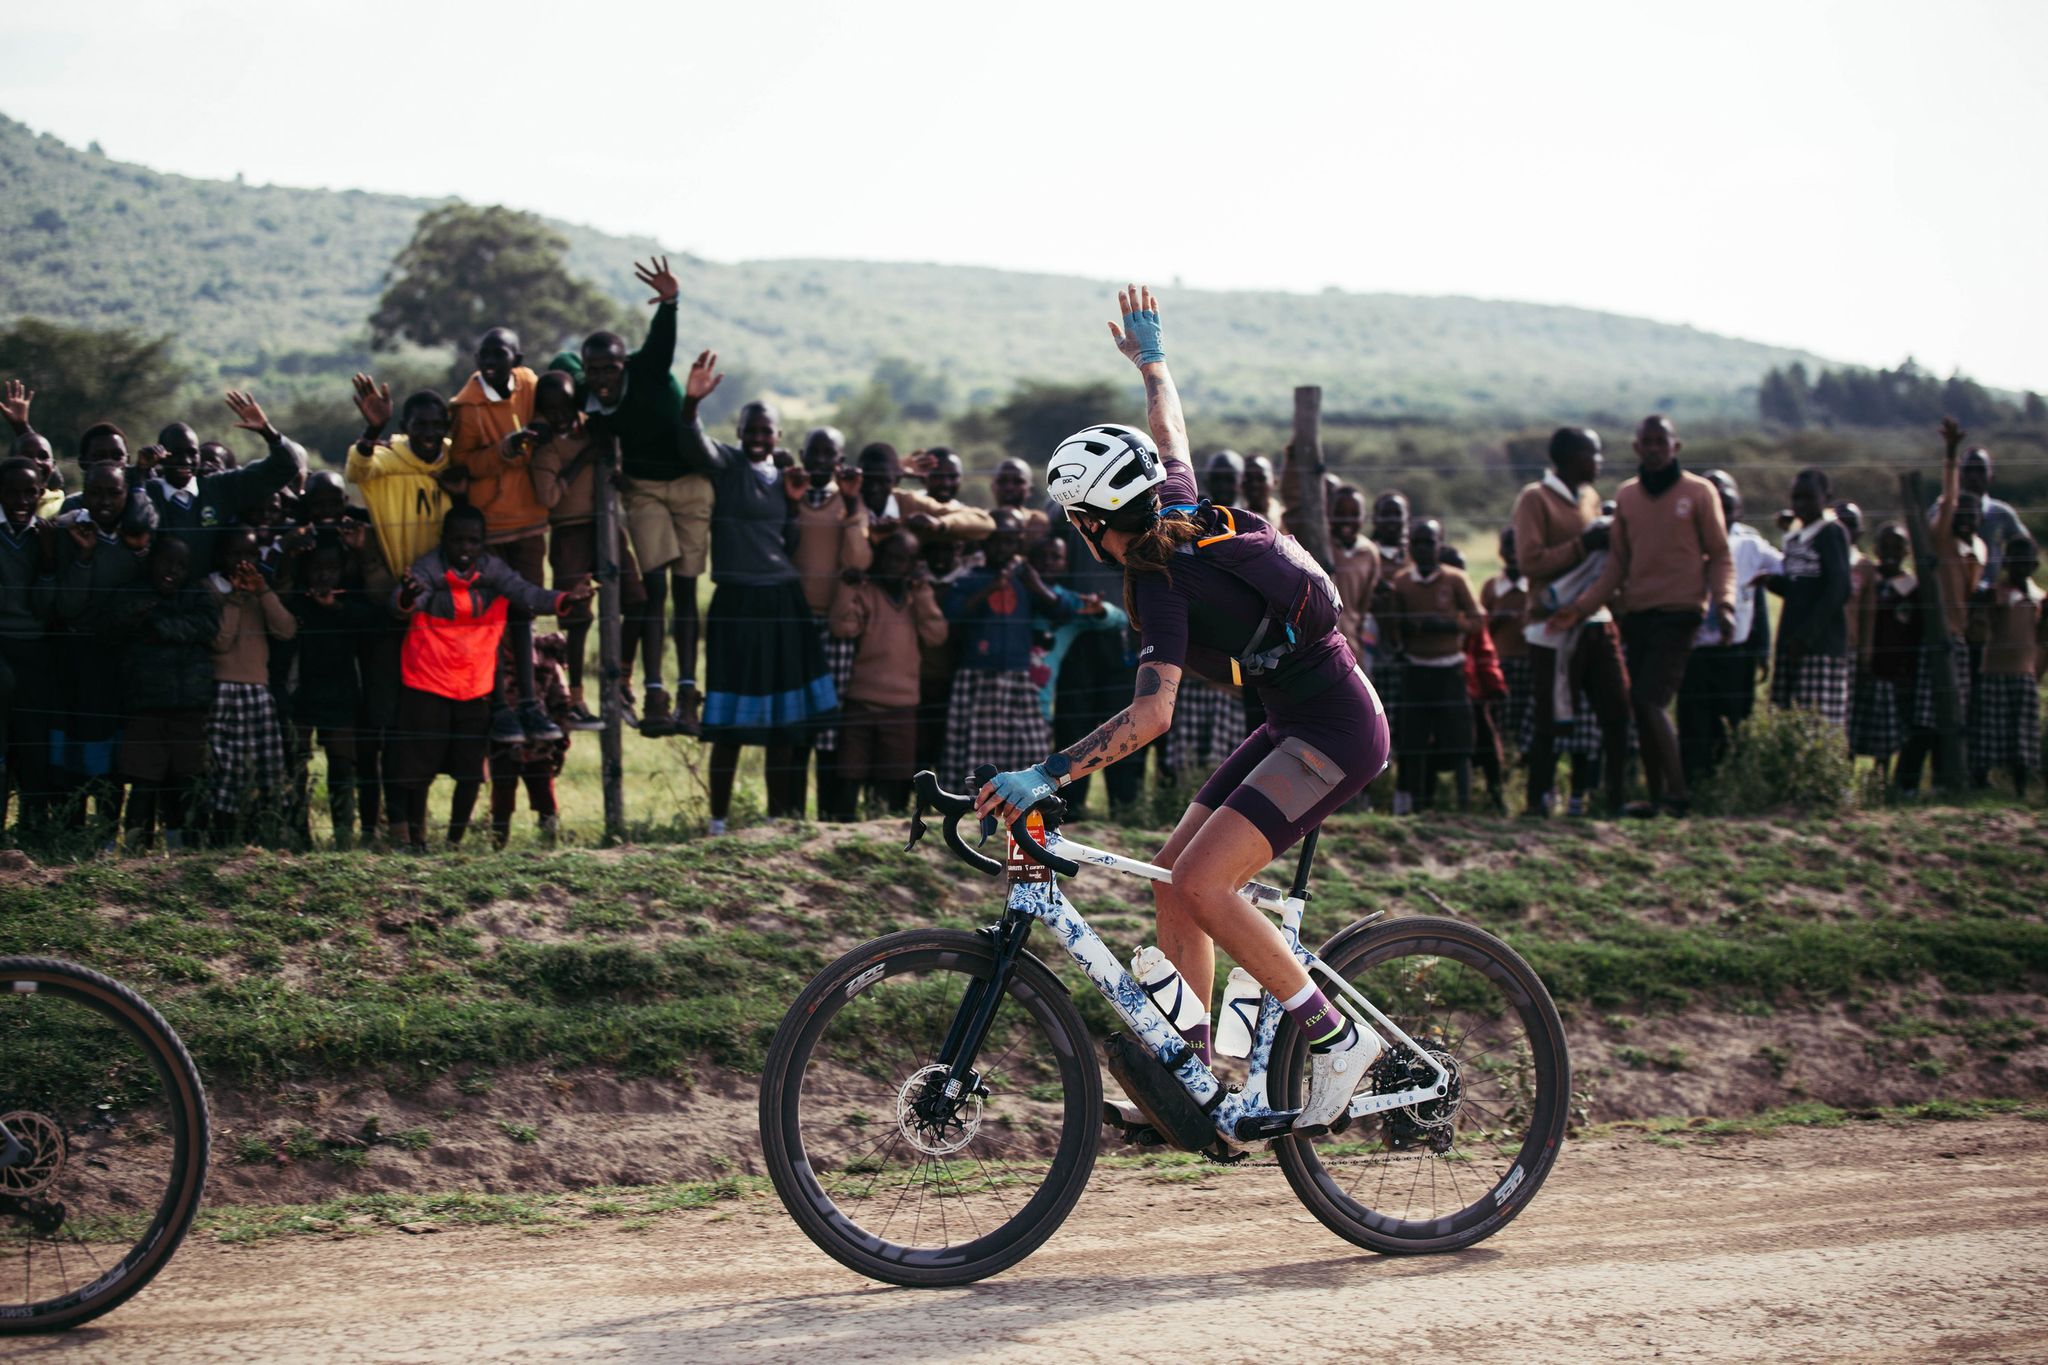 a cyclist riding on a dirt road waves to a crowd of spectators